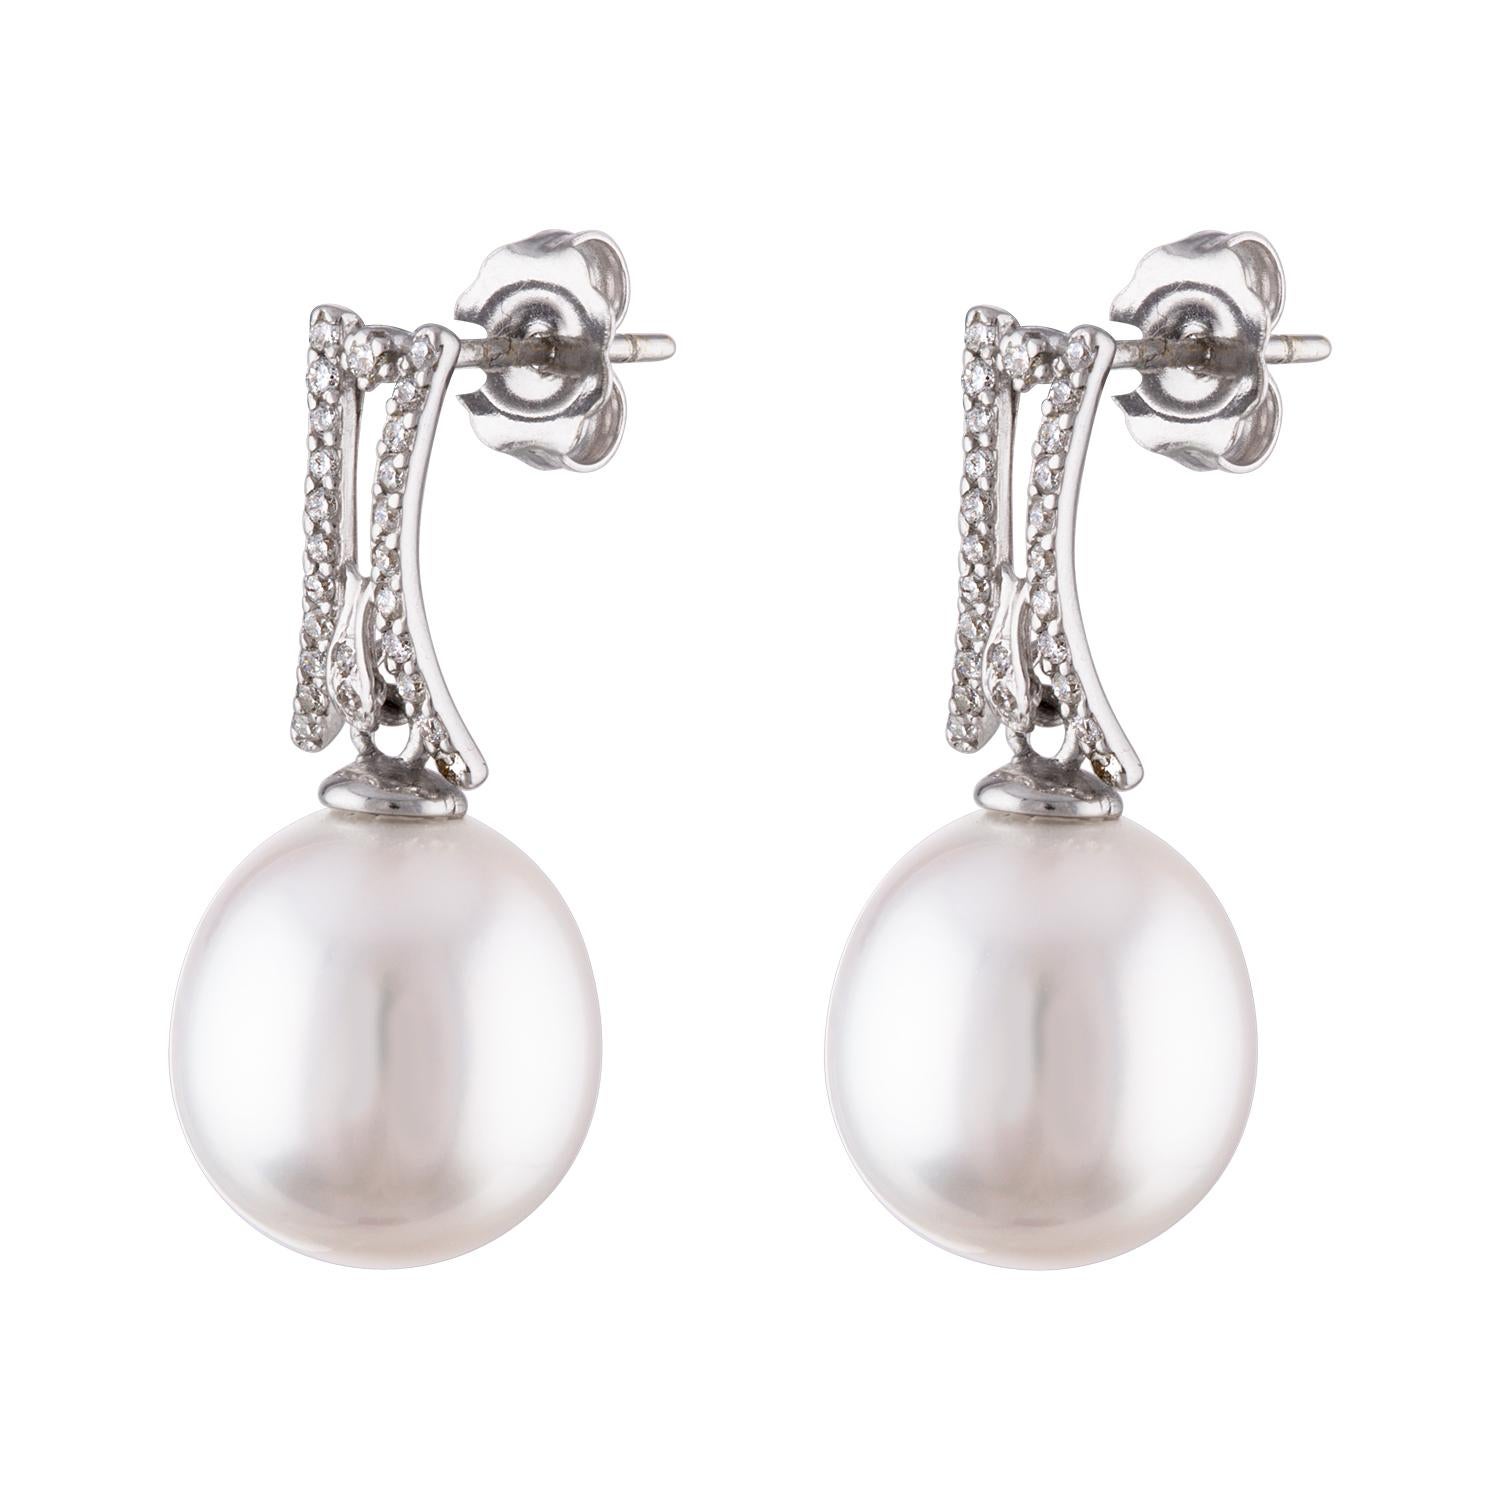 These dangle earrings feature South Sea white cultured drop pearls measuring 11.3x12.2mm set on 18 karat white gold and diamond findings. The earrings consist of 0.24 carats total of diamonds. The earrings are fitted with secure push friction backs.